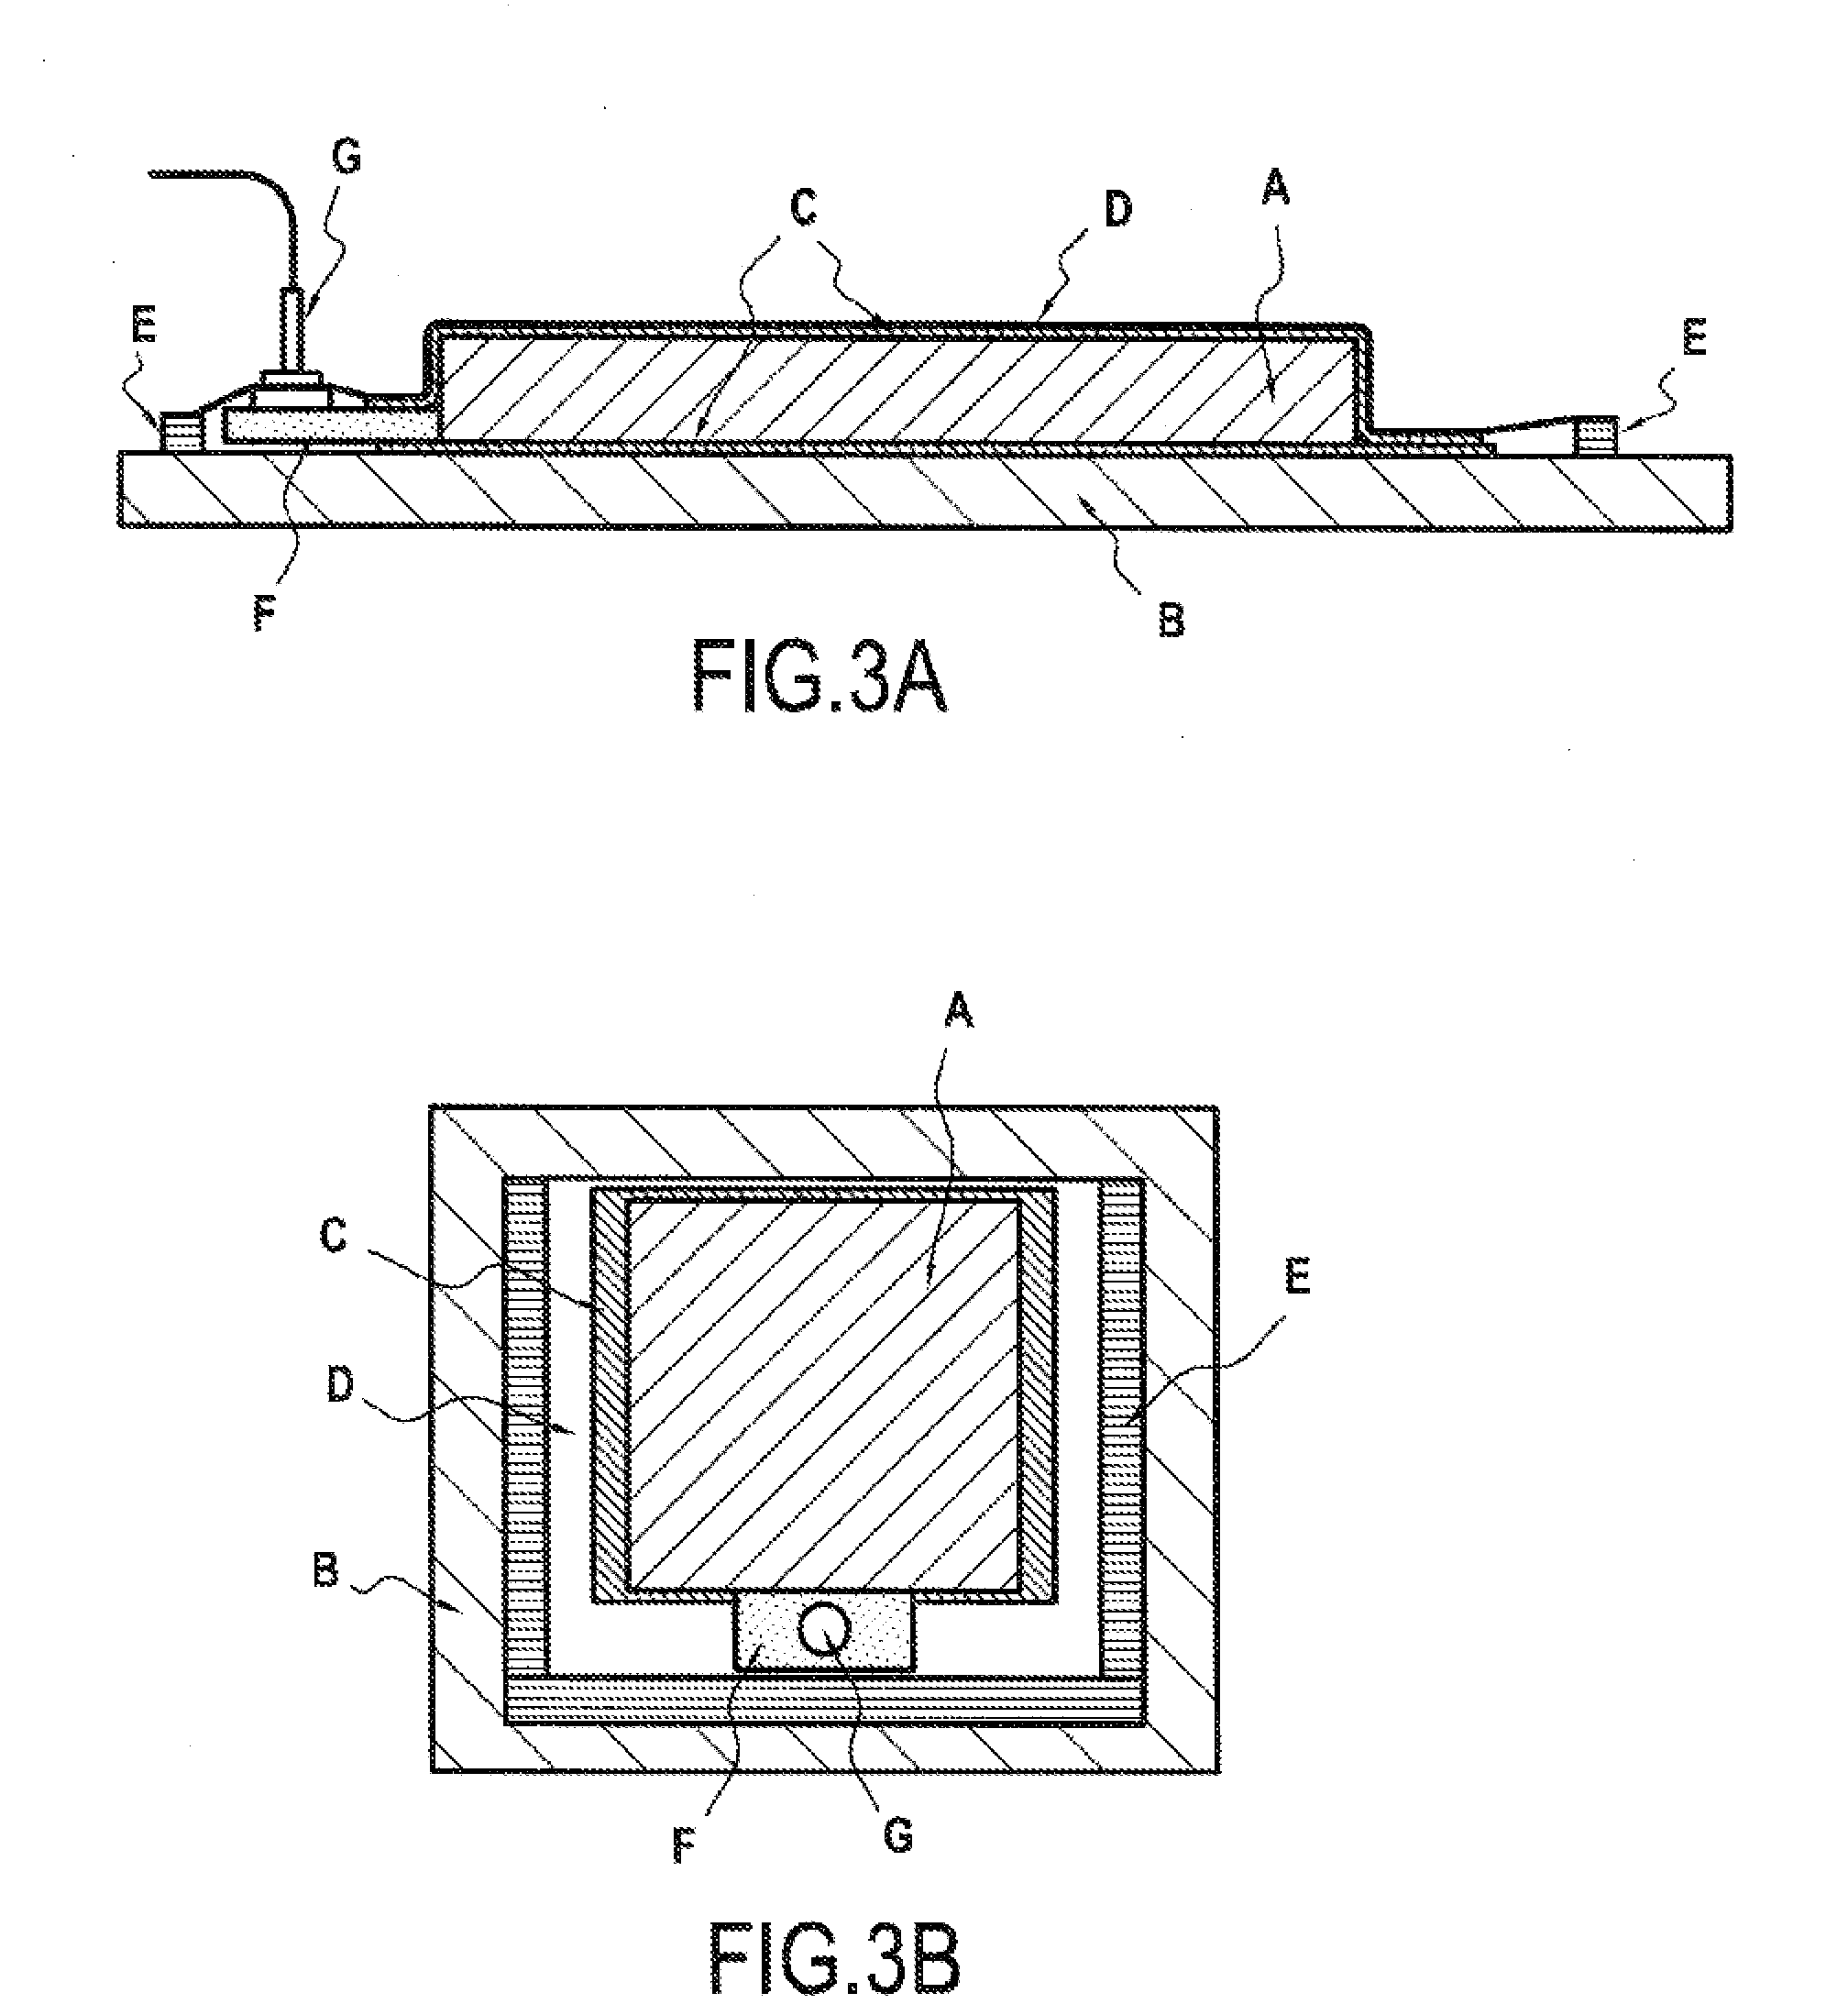 Fibrous preforms for use in making composite parts